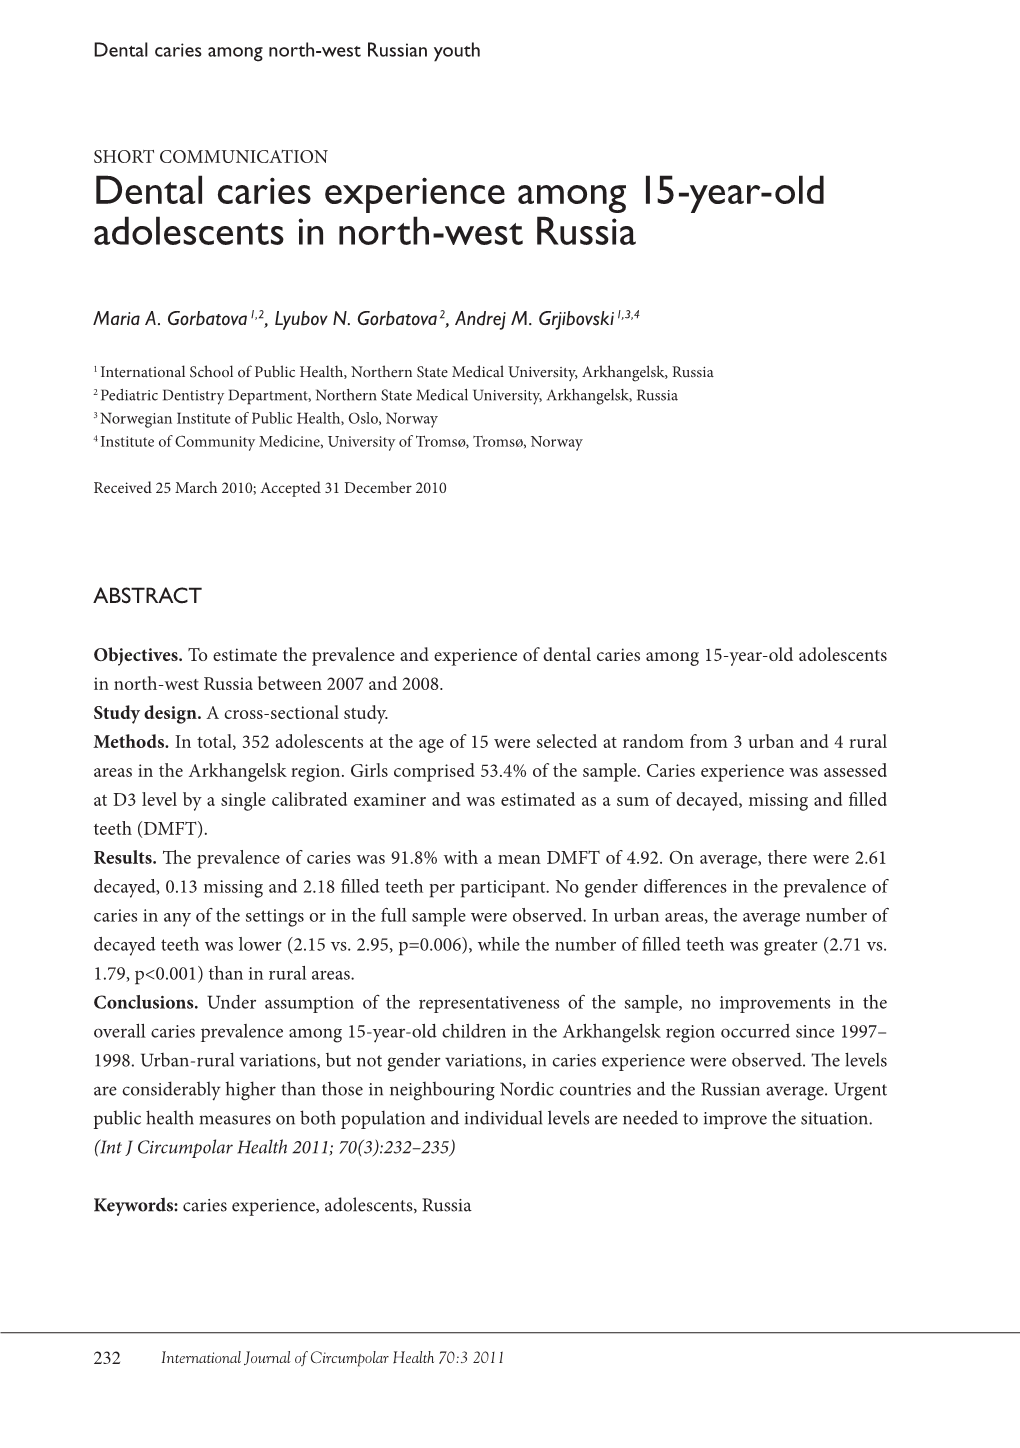 Dental Caries Experience Among 15-Year-Old Adolescents in North-West Russia